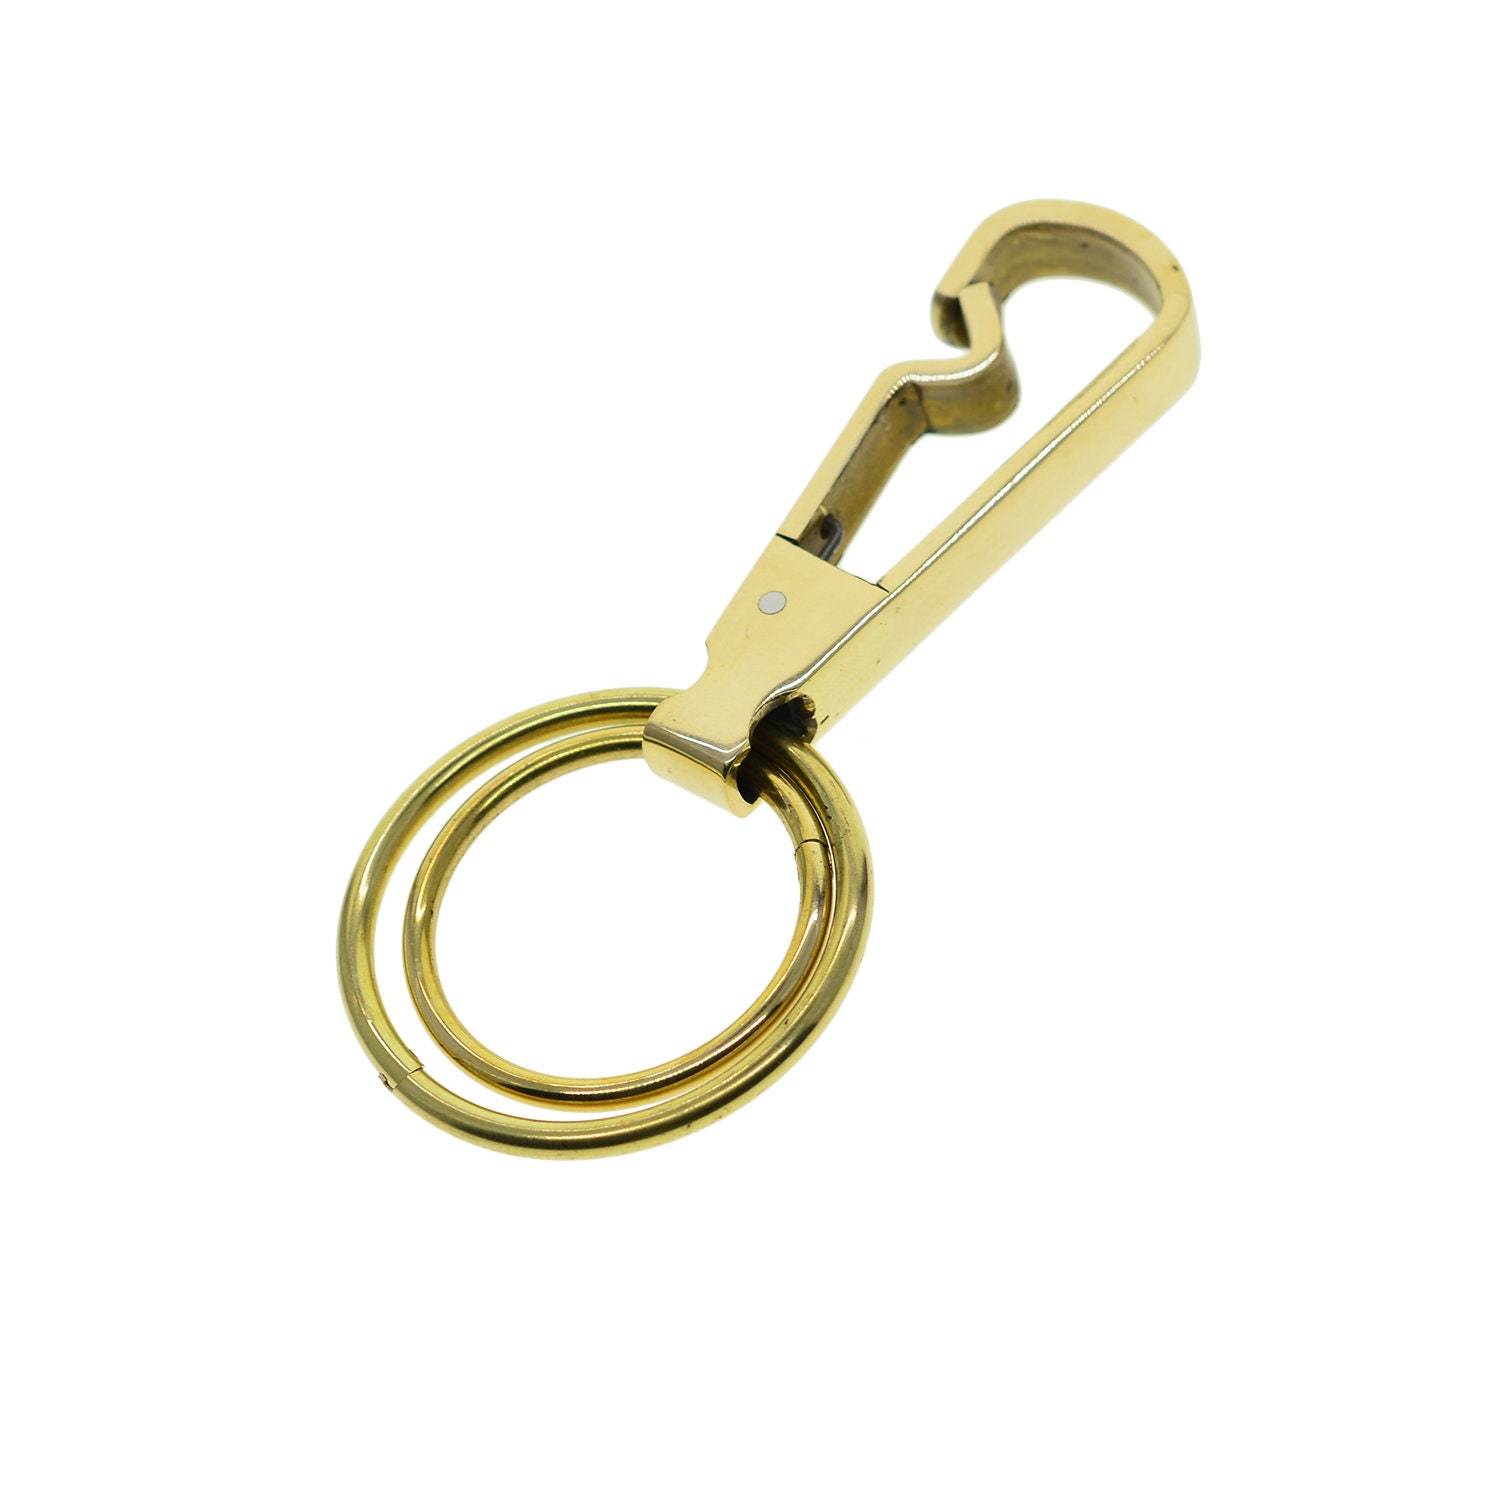 Solid Brass easy open spring Snap Hook Luxury business car Key holder Fob  Lanyard mirror polished Jump lock ring keychains